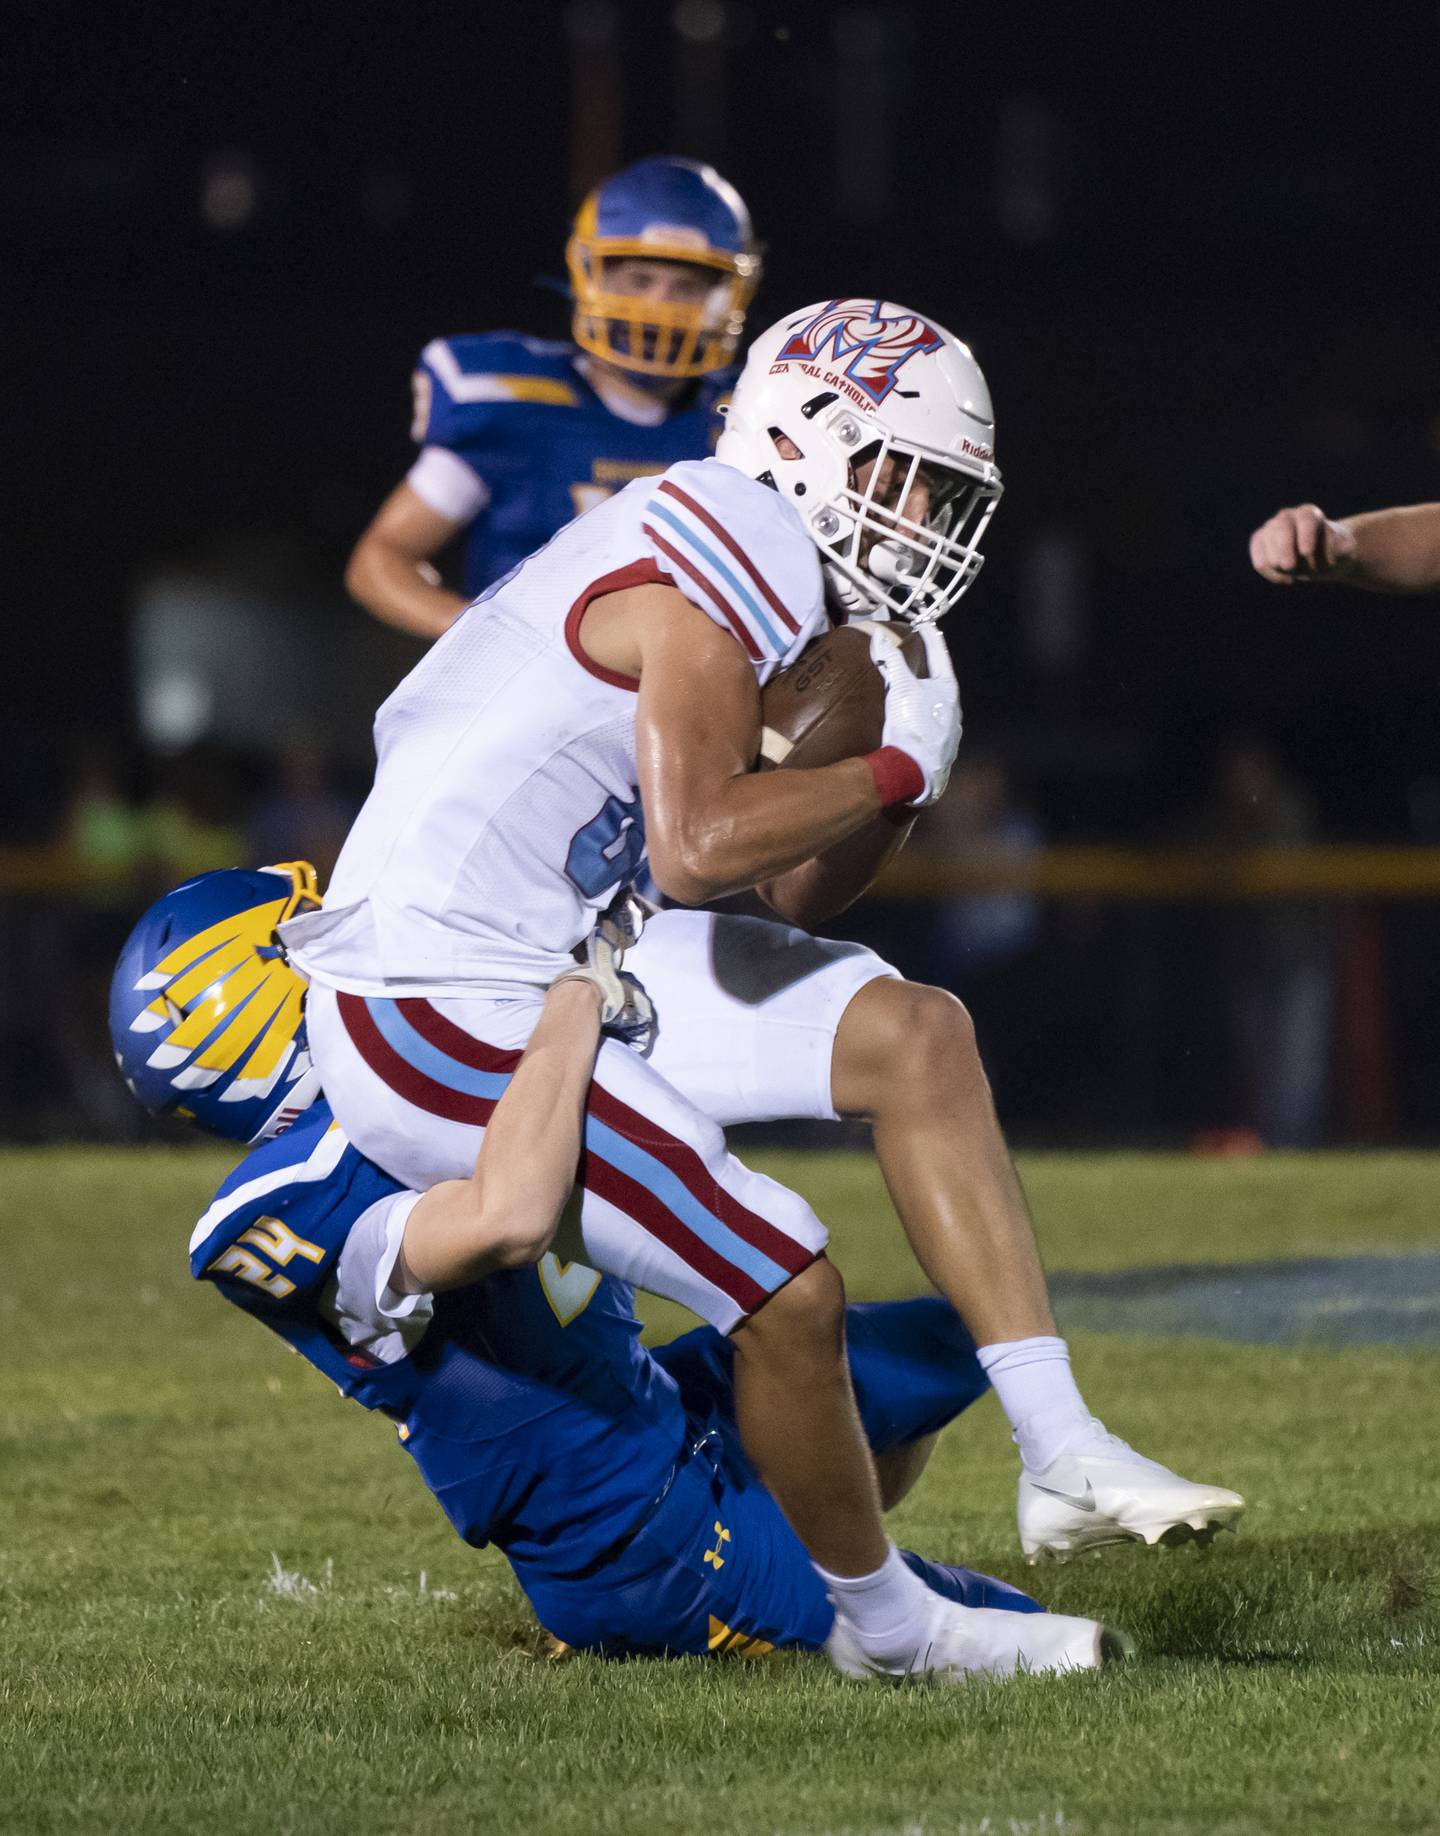 Marian Central's Christian Bentancur is taken down by Johnsburg's Tyler Pfefferkorn during the their game on Aug. 27, 2021 in Johnsburg.